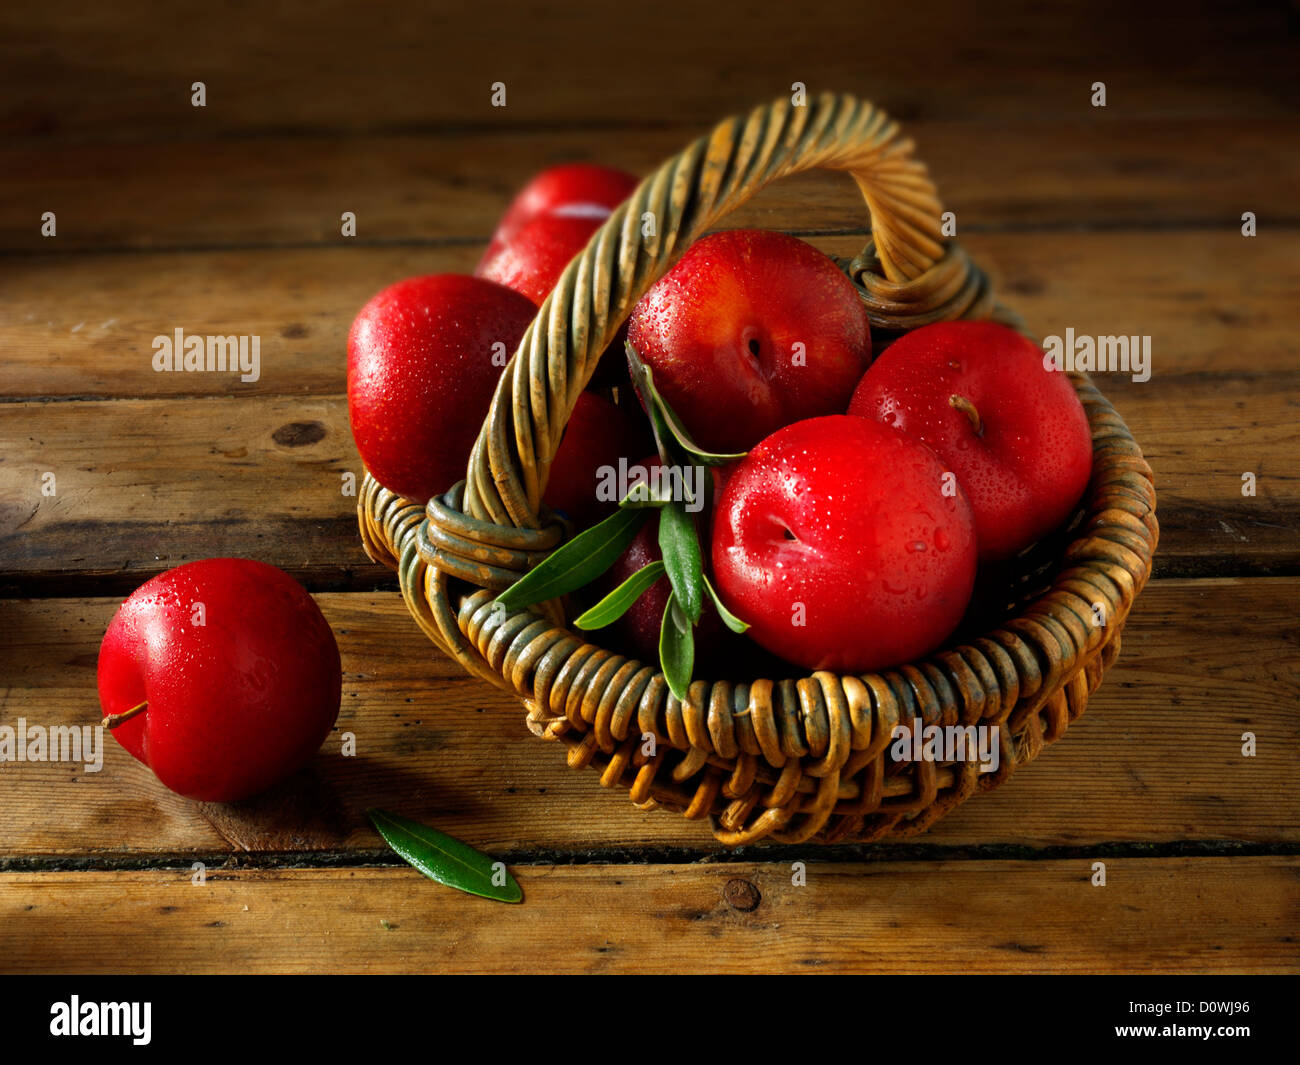 Fresh whole red plums Stock Photo